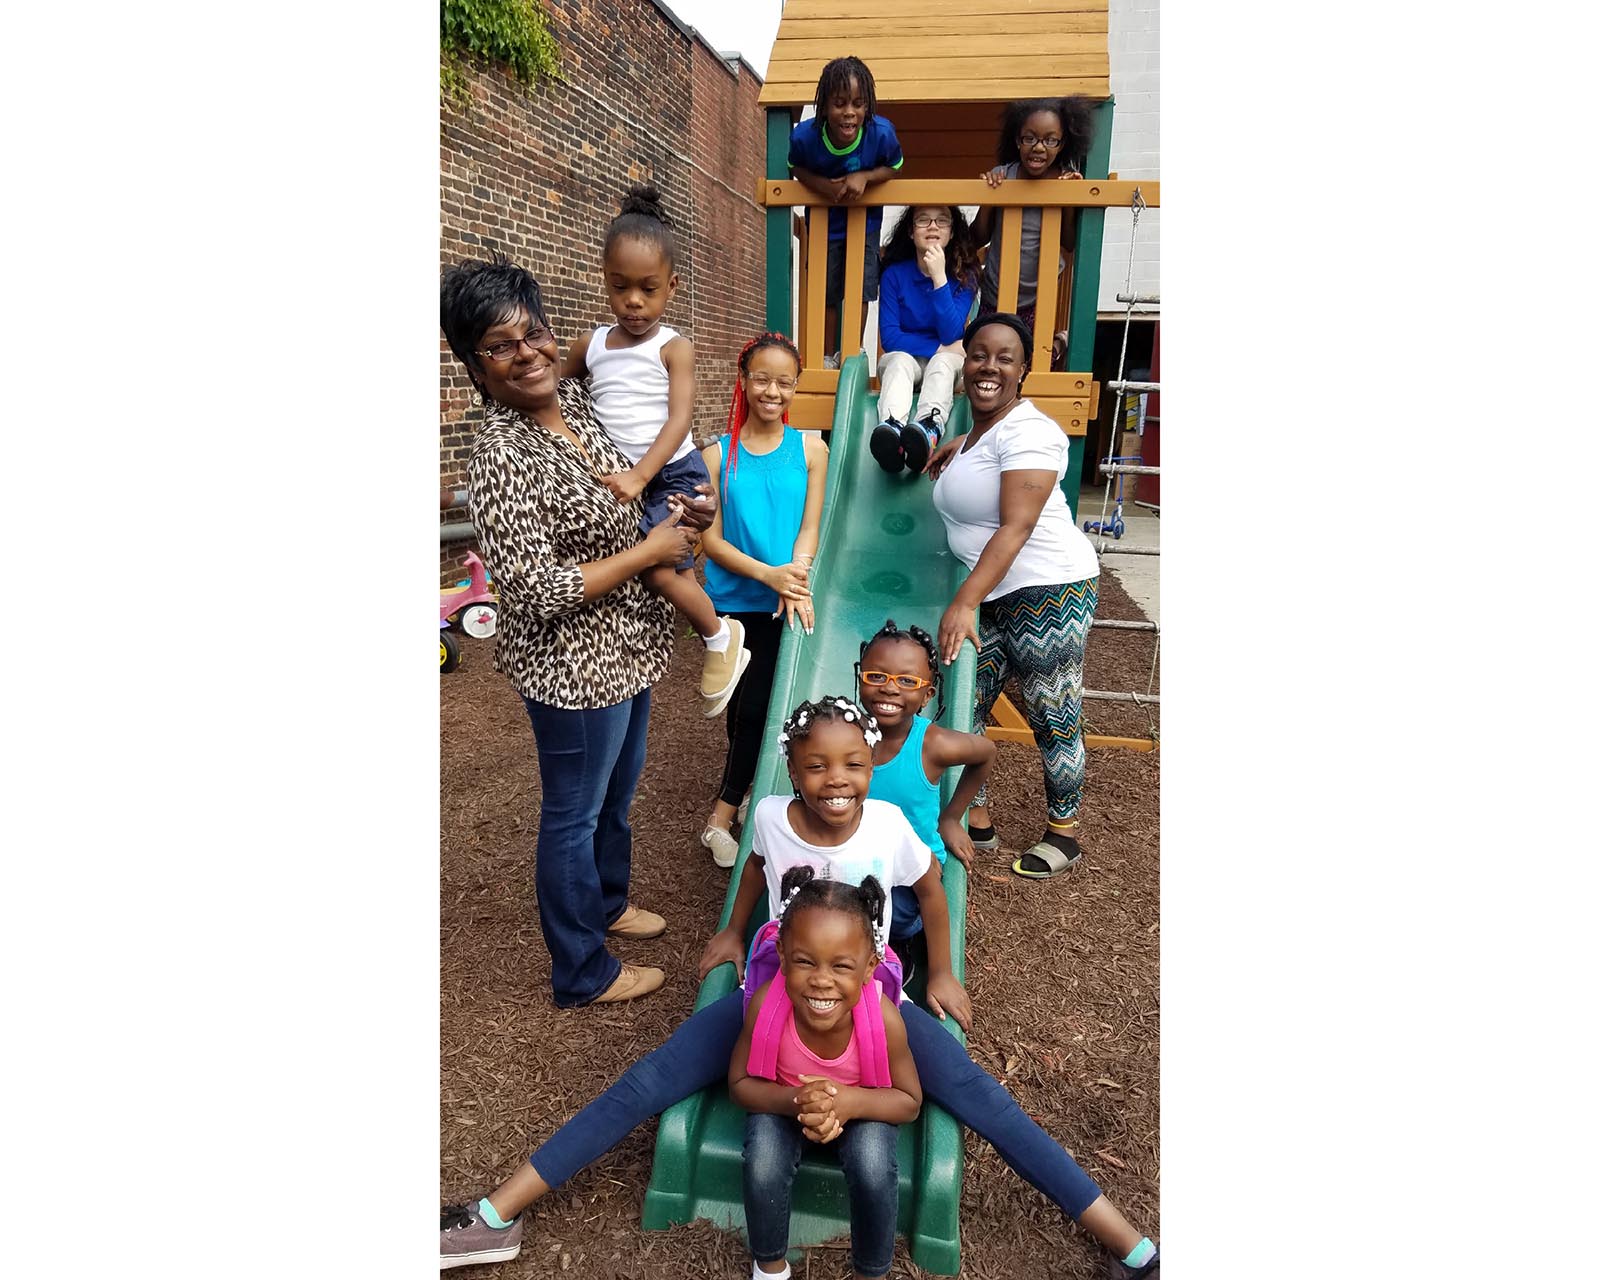 A group of women and children on a playground